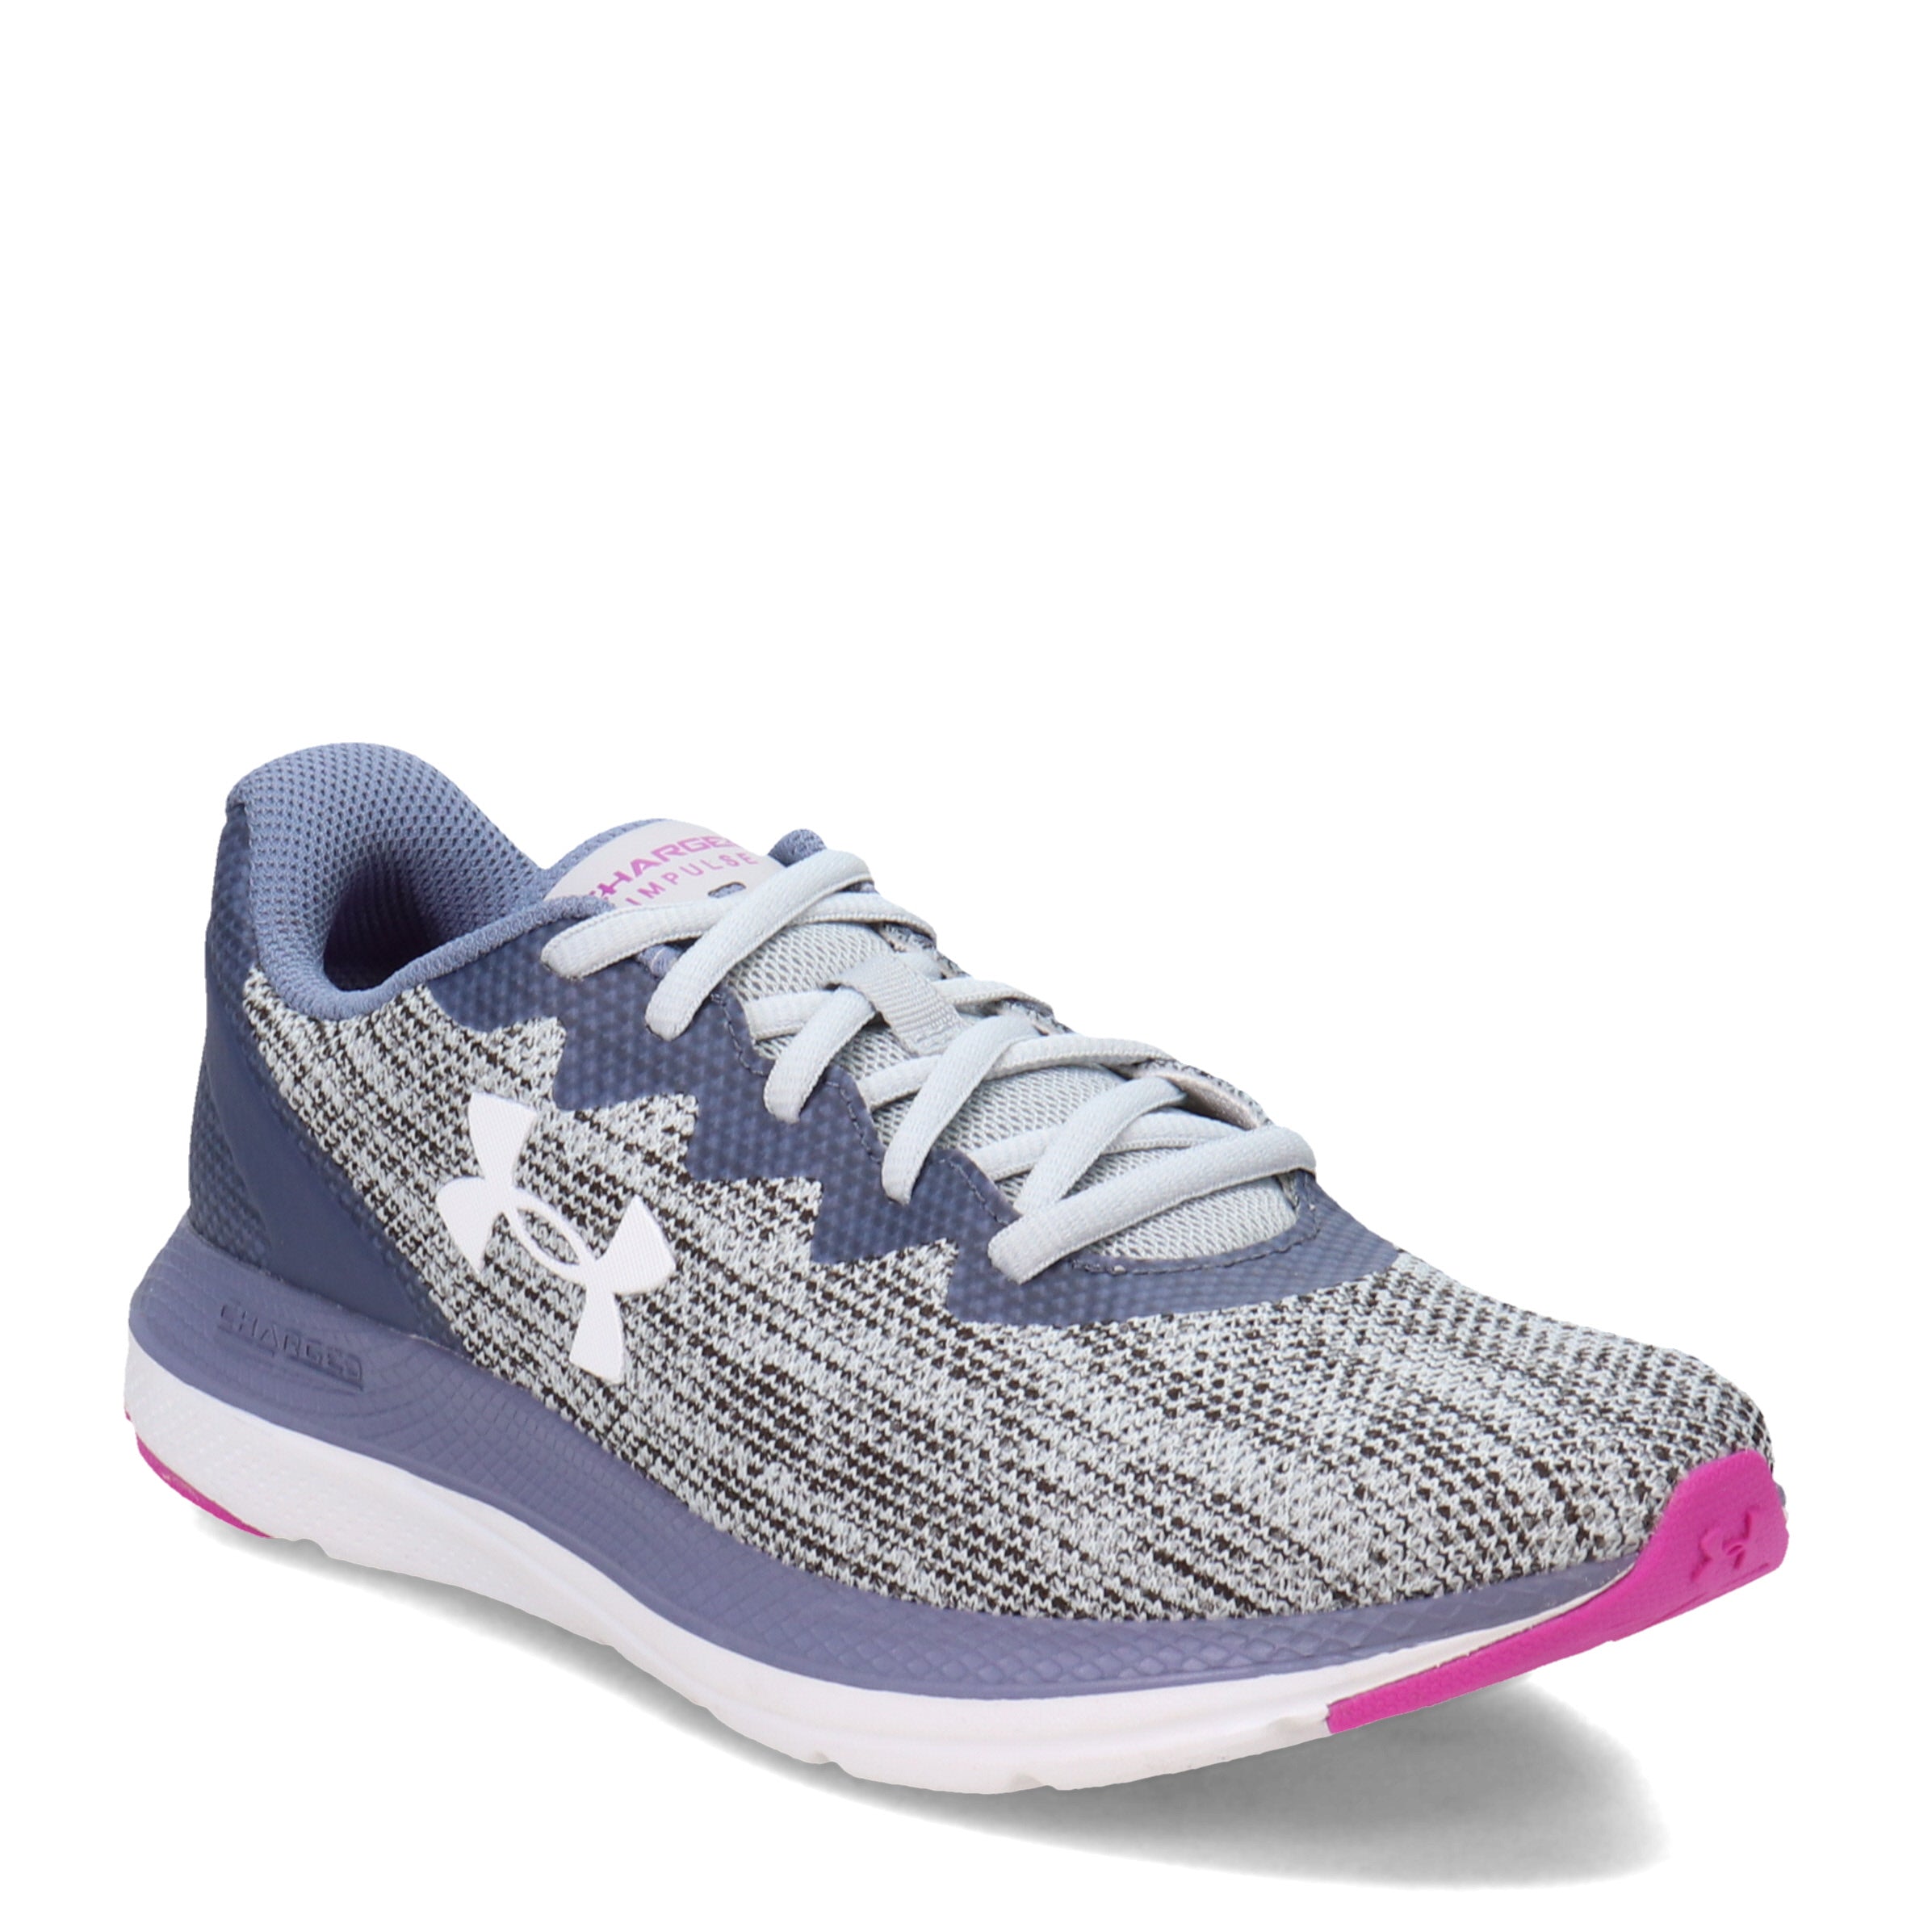 Women's Under Armour Charged Pursuit 3 Running Shoe